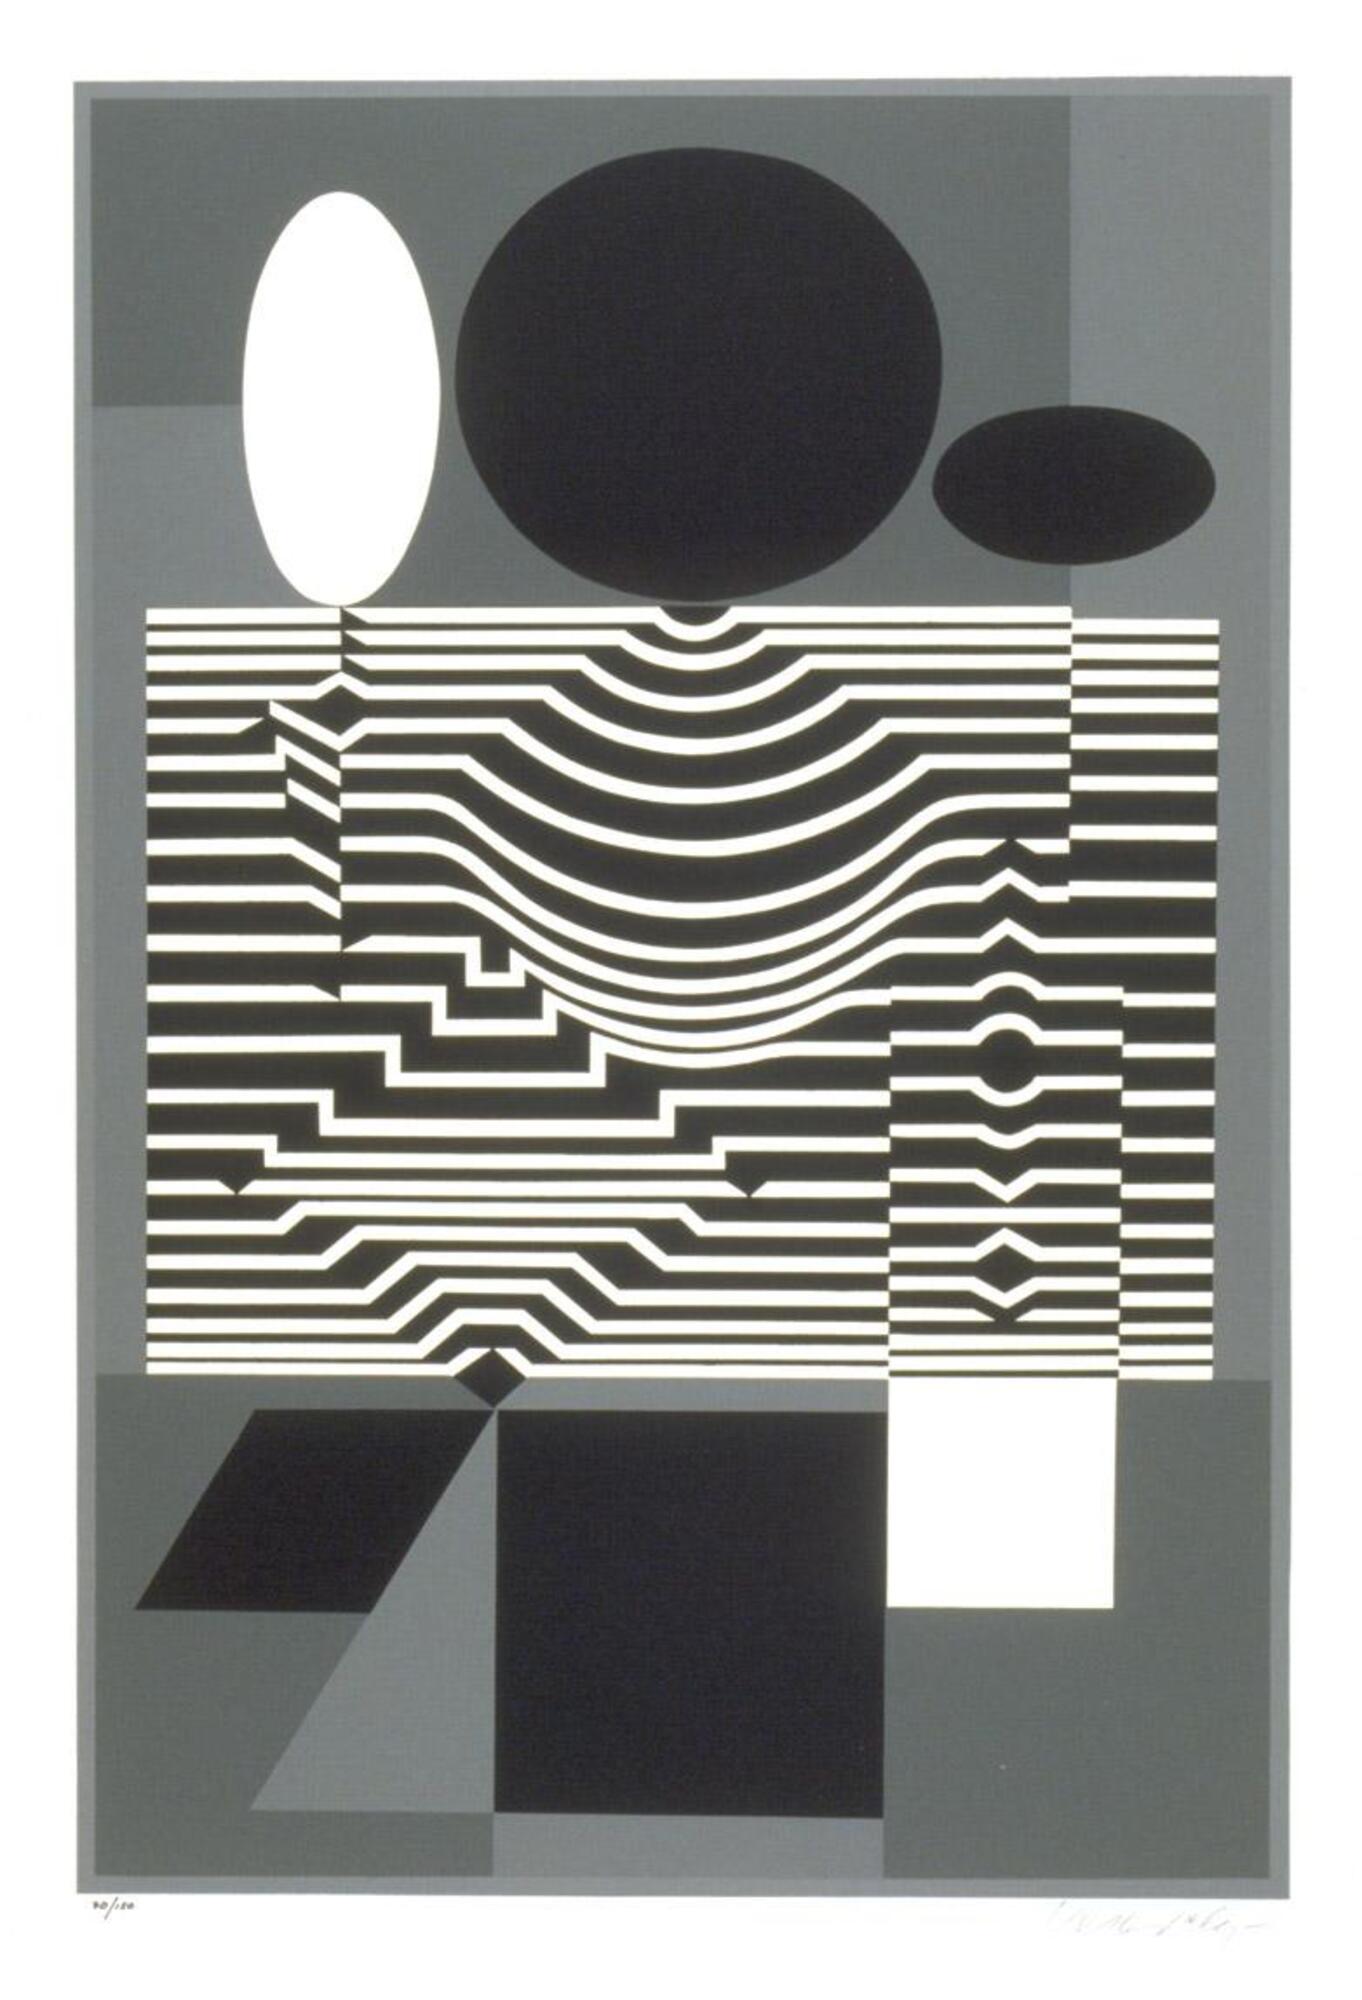 At the top of the print, there are three oval shapes, from the left, the first white and the next two black. Undulating horizontal black and white lines create a rectangular section at the center of the composition, interrupted to create other geometric shapes. There are light grey, black, and white triangles and squares at the bottom of the image. Overall, the background is a solid grey. The print is signed in pencil (l.r.) "Vasarely-" and numbered in ink (l.l.) "70/150".